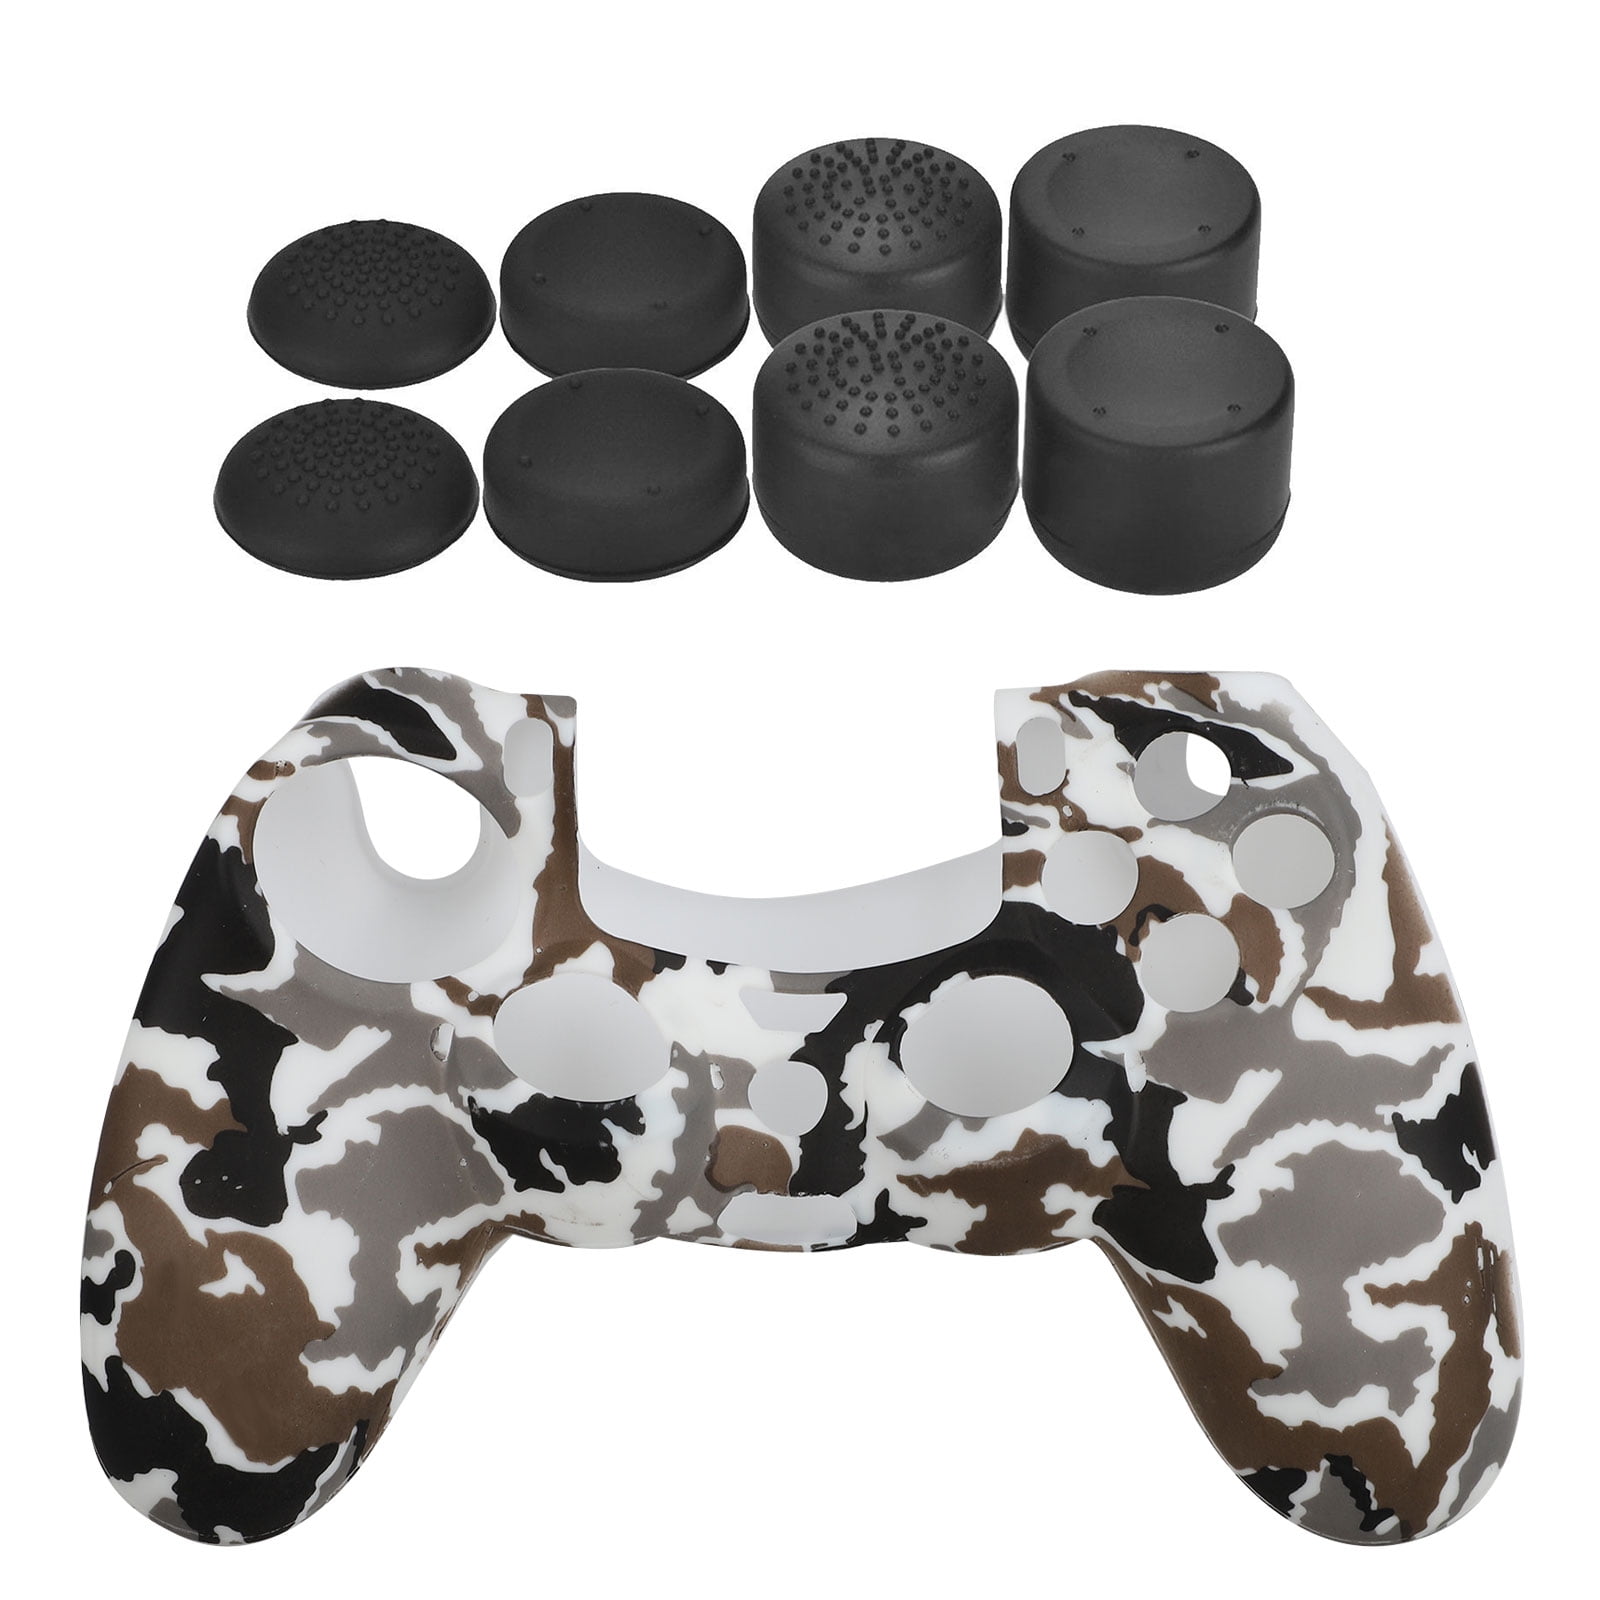 Eeekit Camouflage Silicone Gel Controller Cover Skin Protector Compatible For Sony Playstation 4 Ps4 Ps4 Slim Ps4 Pro Controller 2x Controller Camouflage Cover With 8 X Fps Pro Thumb Grip Caps Walmart Com - eeeeee roblox amino